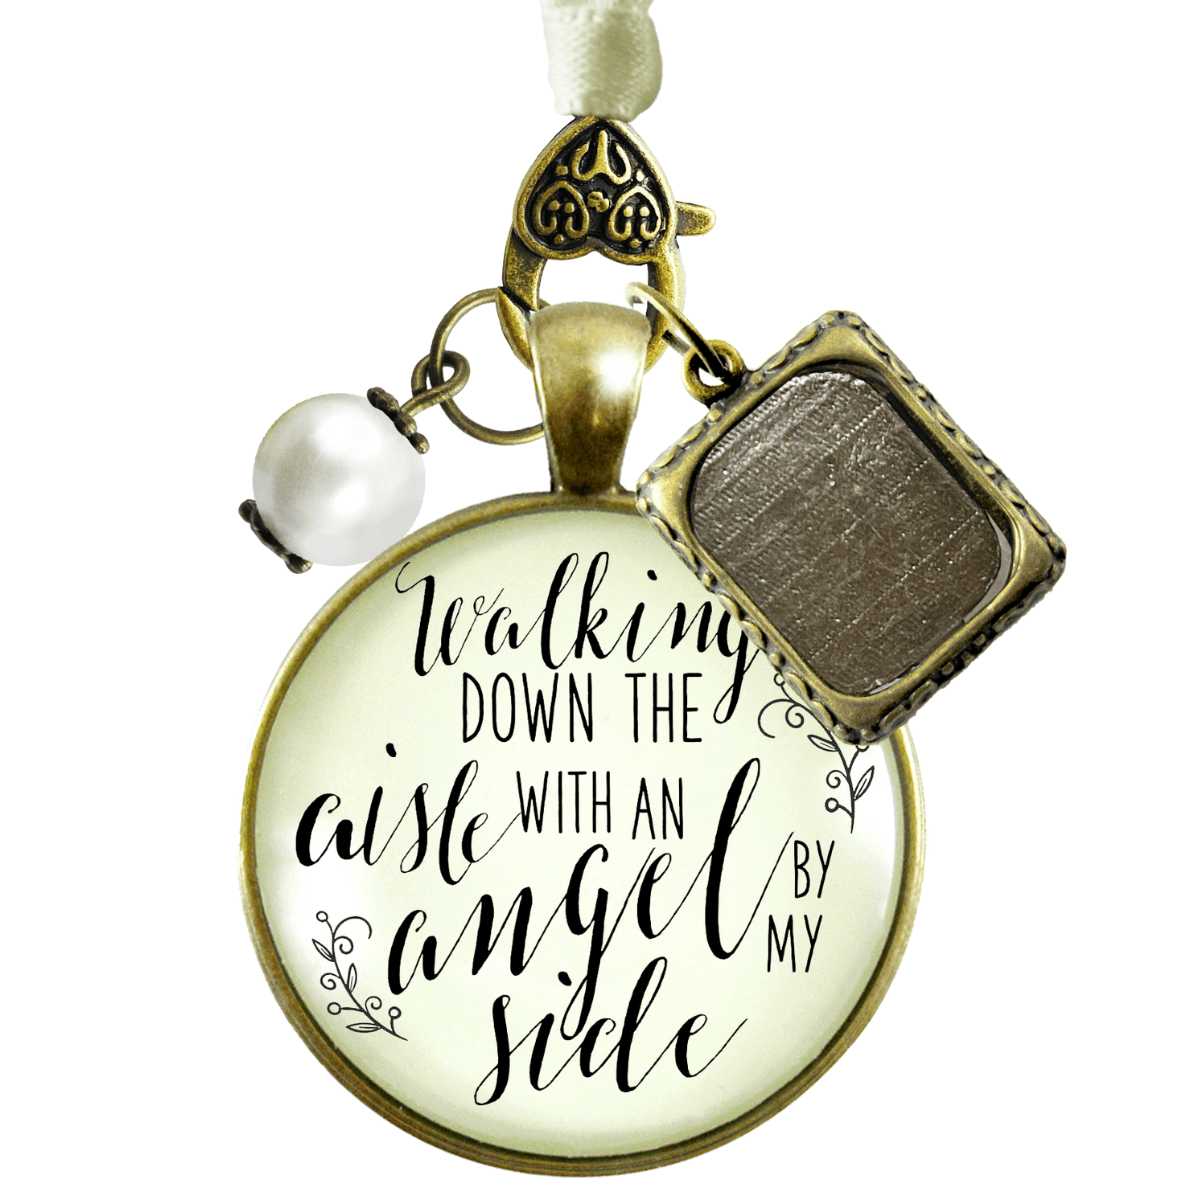 Walking Down The Aisle With An Angel By My Side - BRONZE - CREAM - WHITE BEAD - 1 FRAME